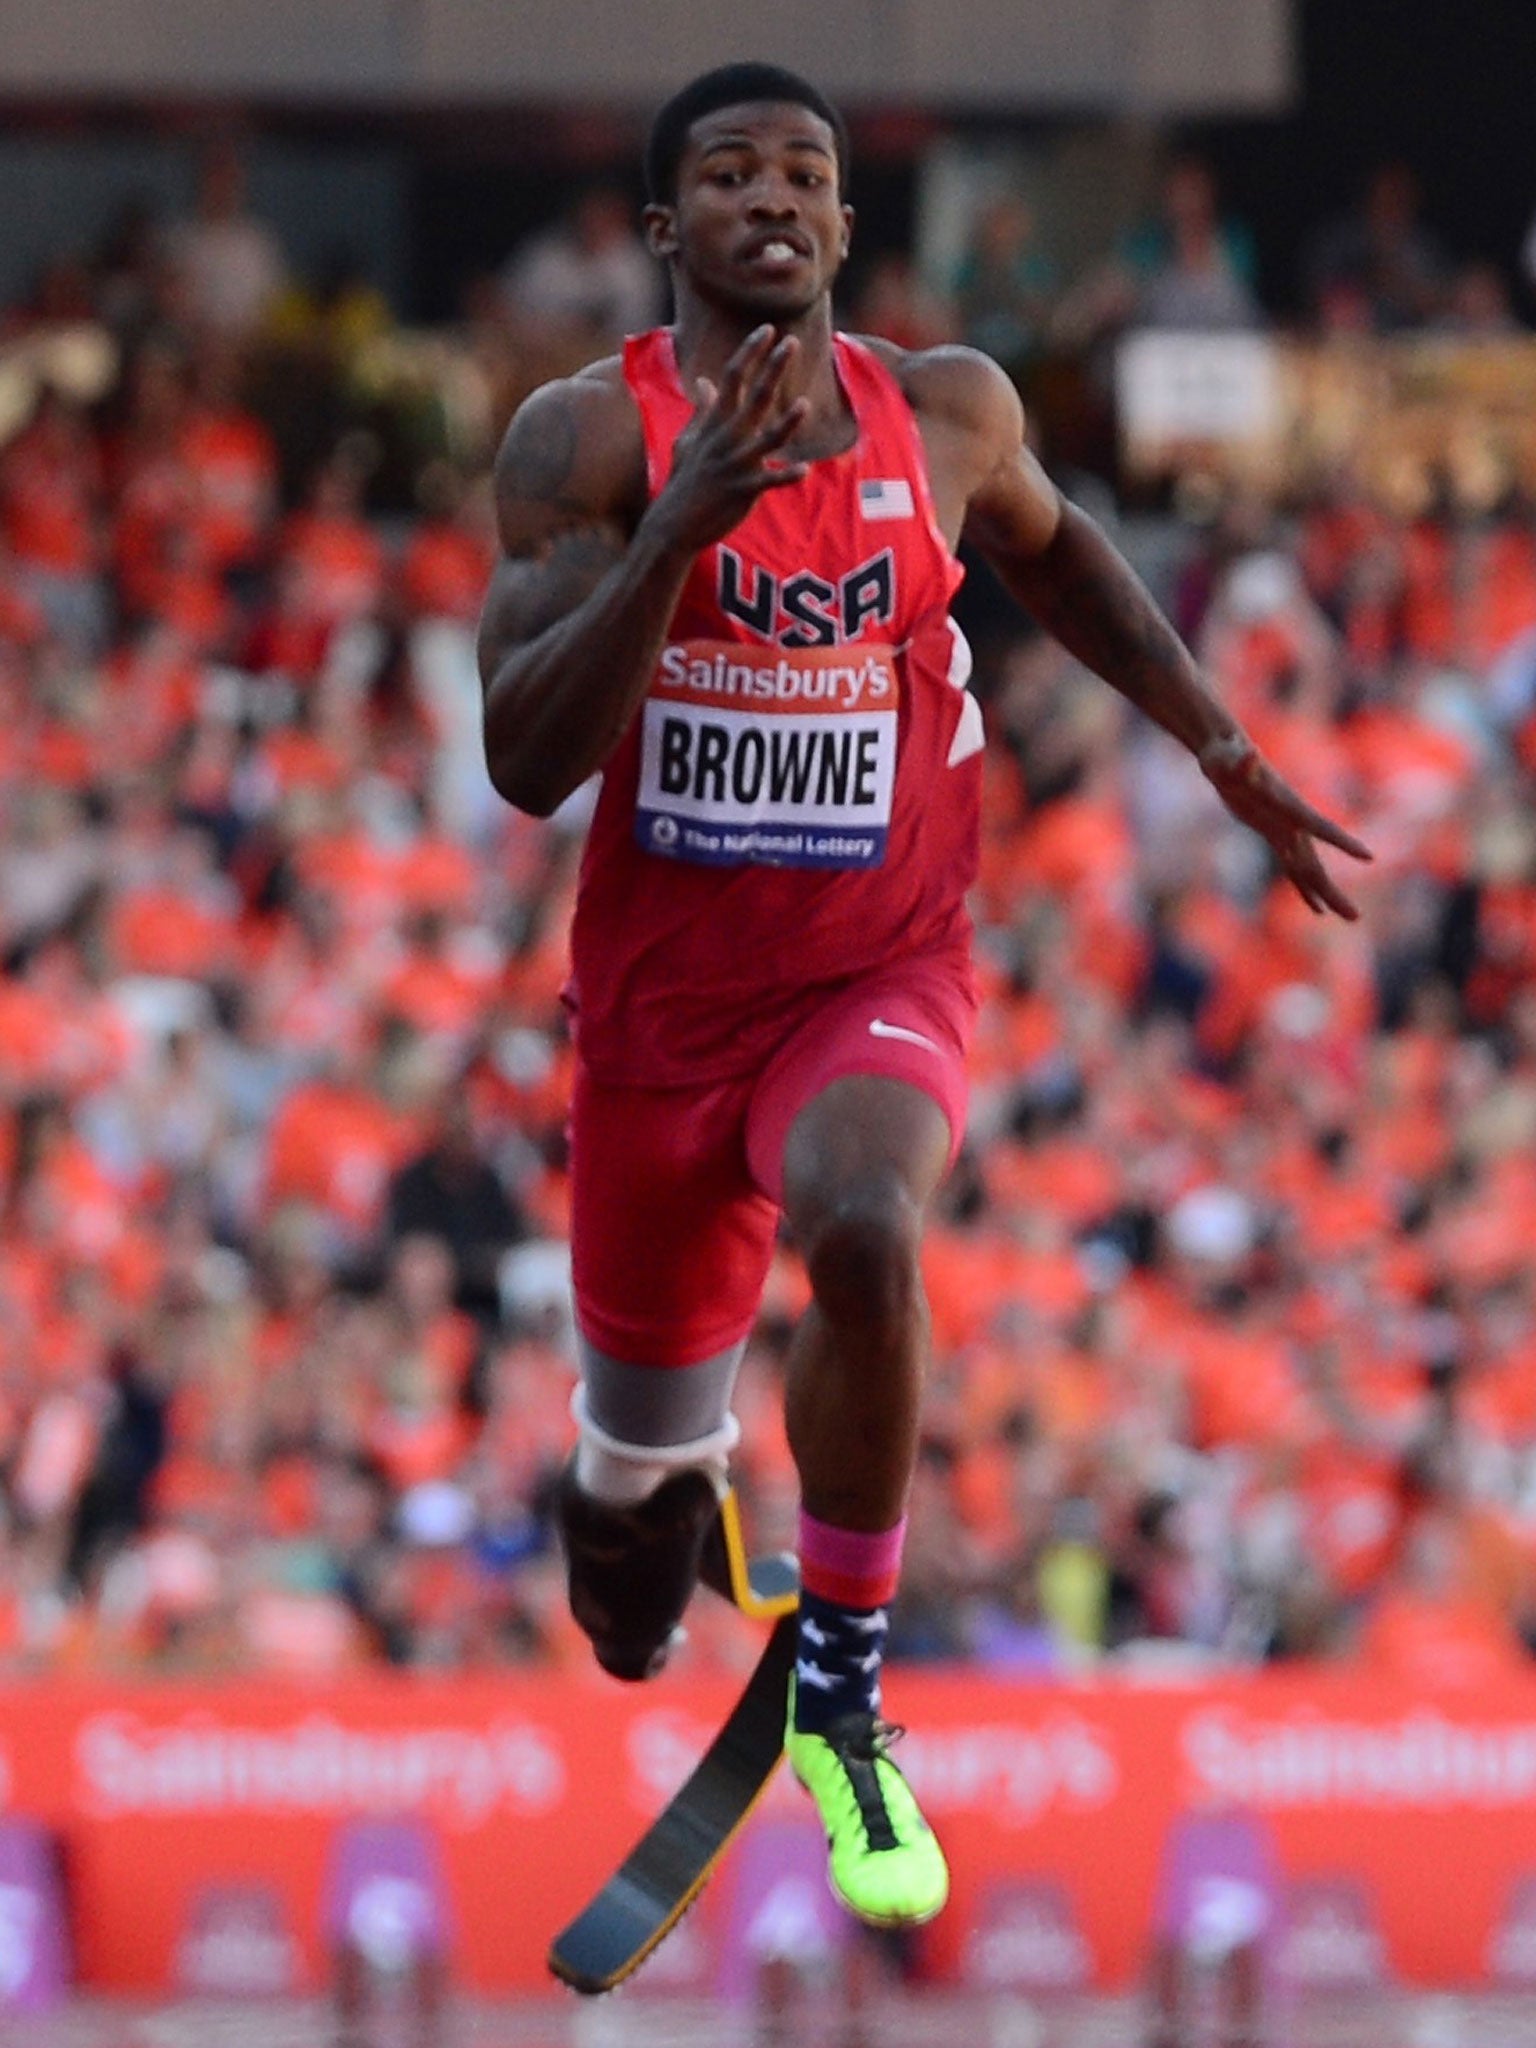 Richard Browne ran 10.75sec in the T43/44 100m at the Anniversary Games in London